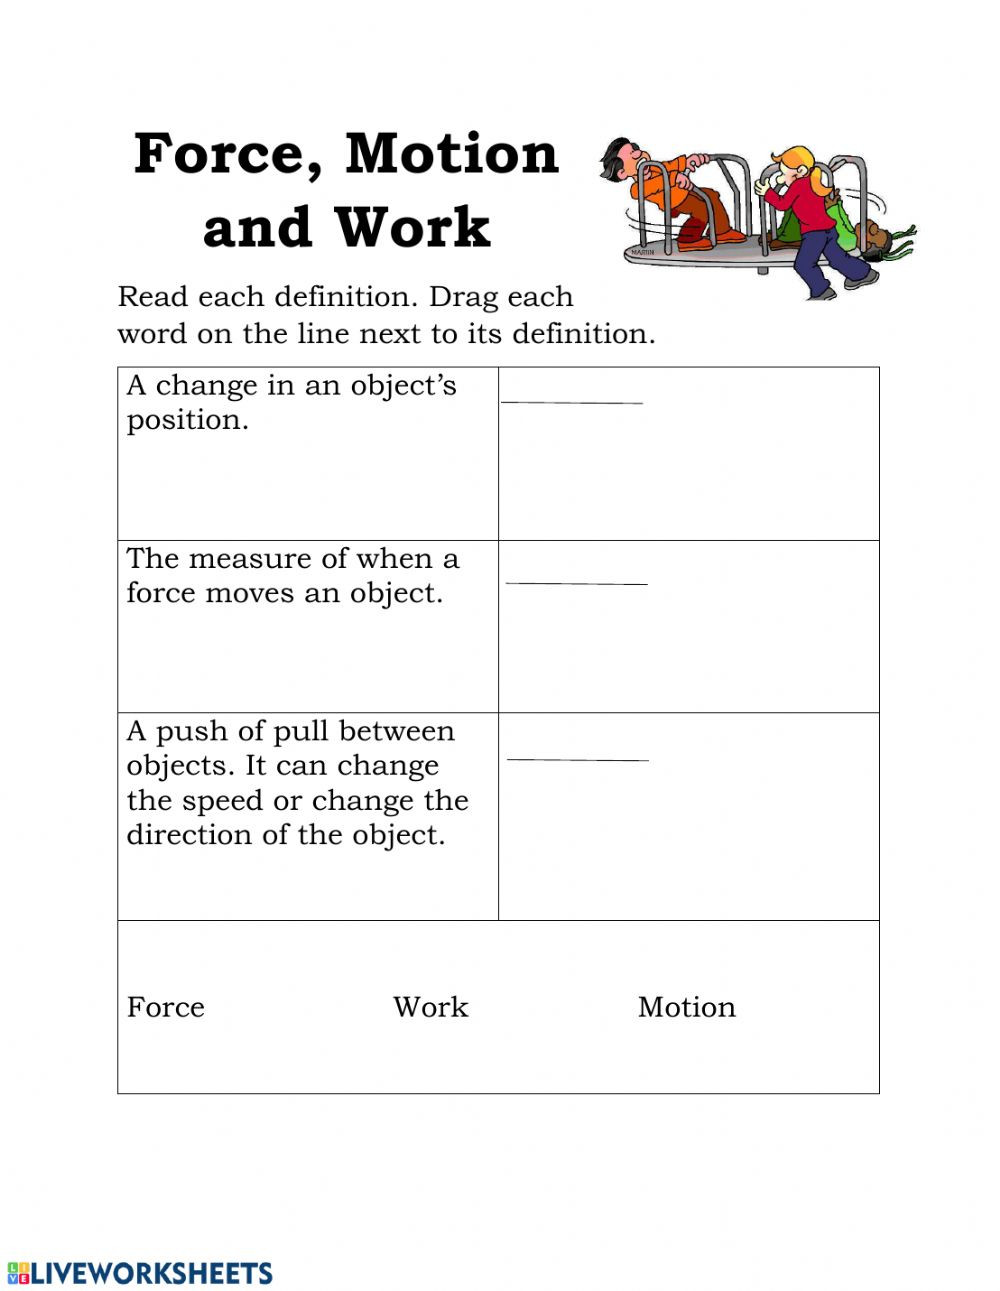 Forces and Motion Worksheet force Work and Motion Interactive Worksheet